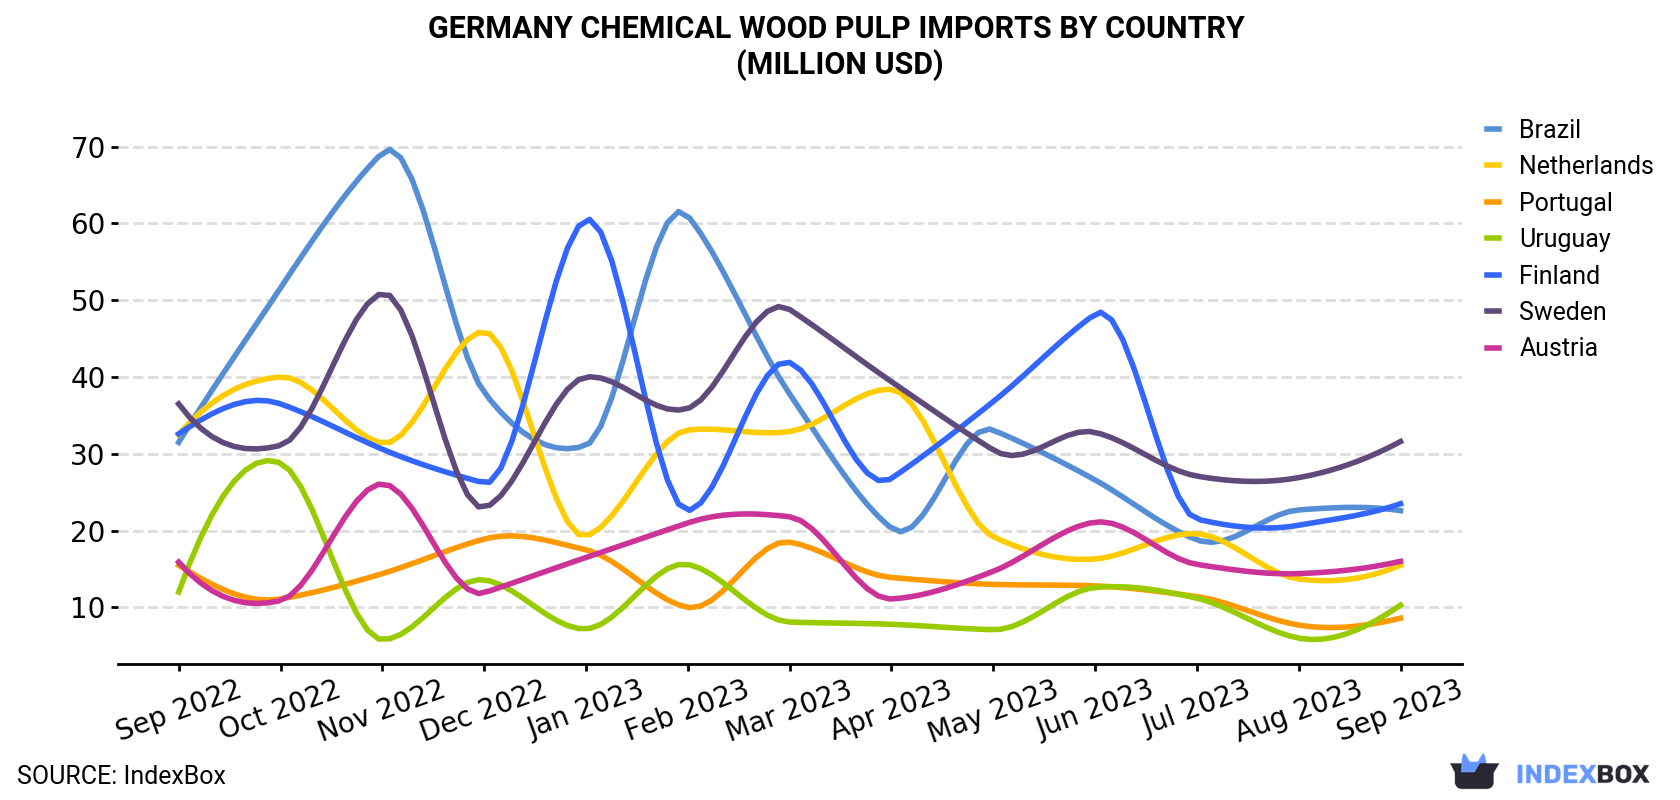 Germany Chemical Wood Pulp Imports By Country (Million USD)